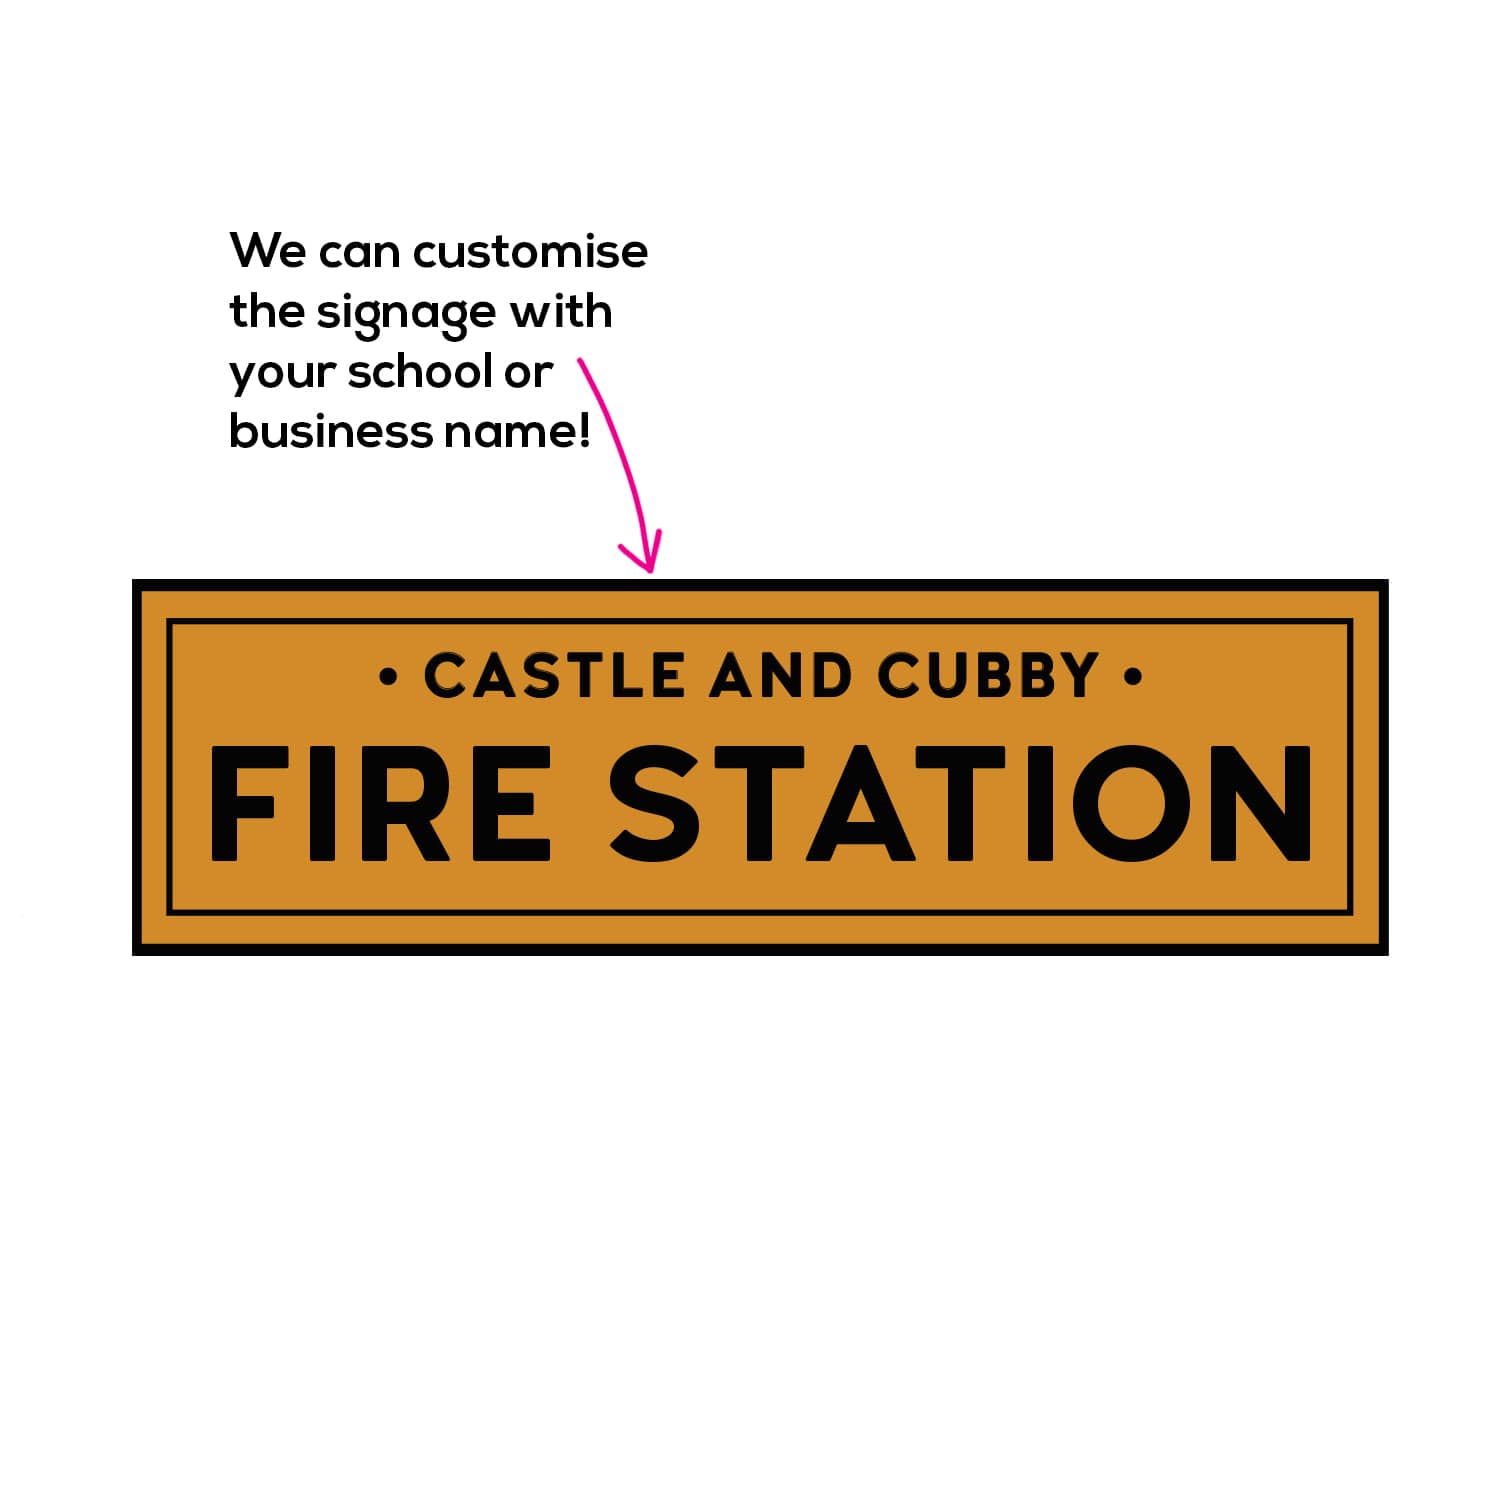 Fire station signage for midi square